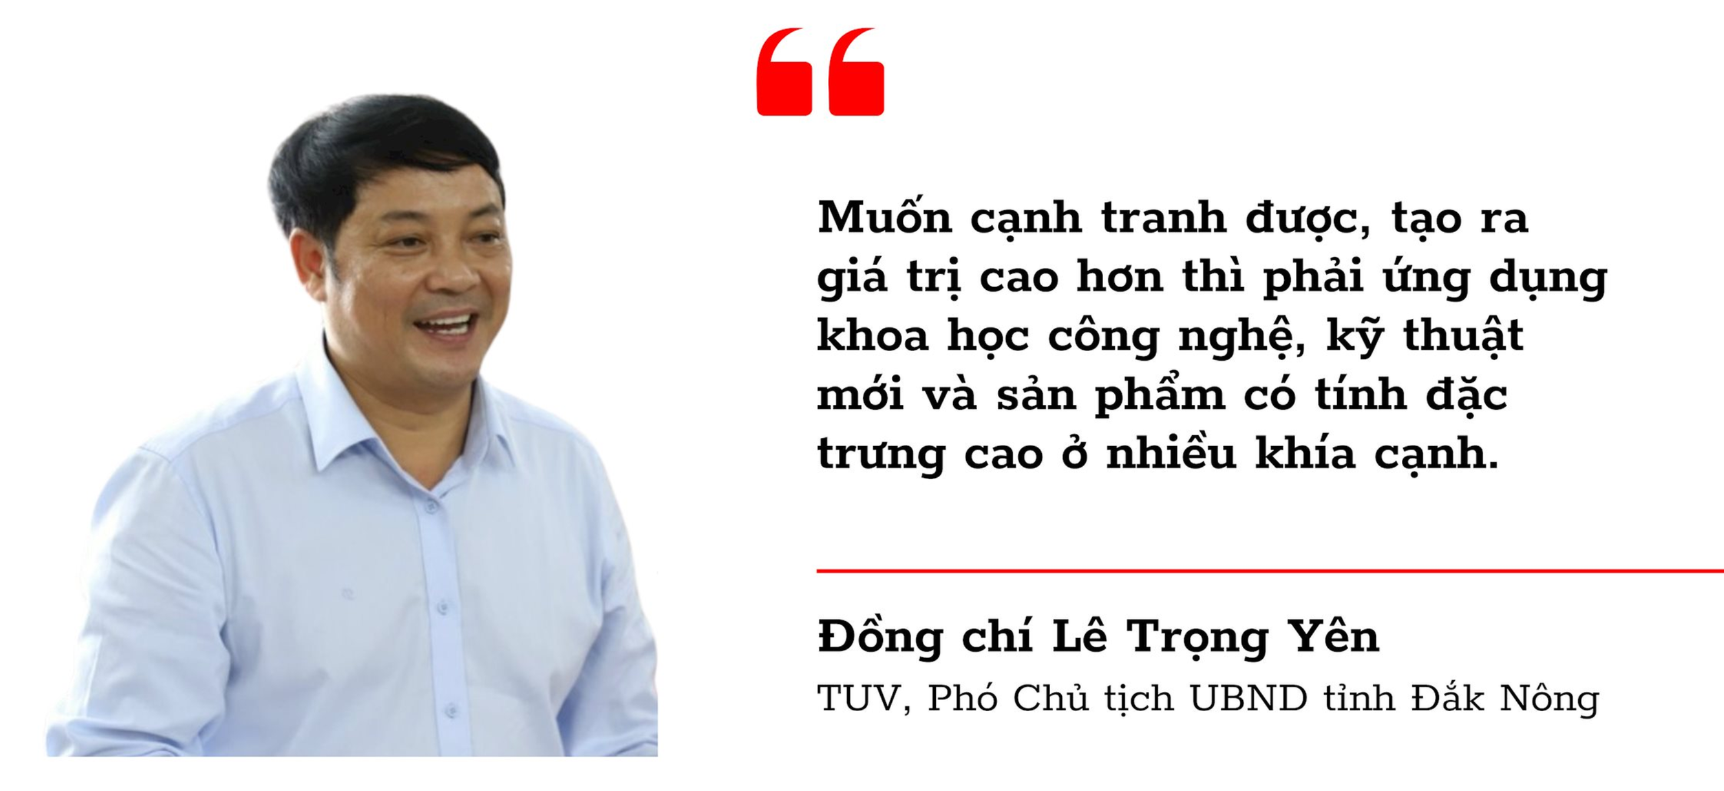 don-gian-khung-nhiep-anh-studio-anh-bia-facebook-4-2-.png